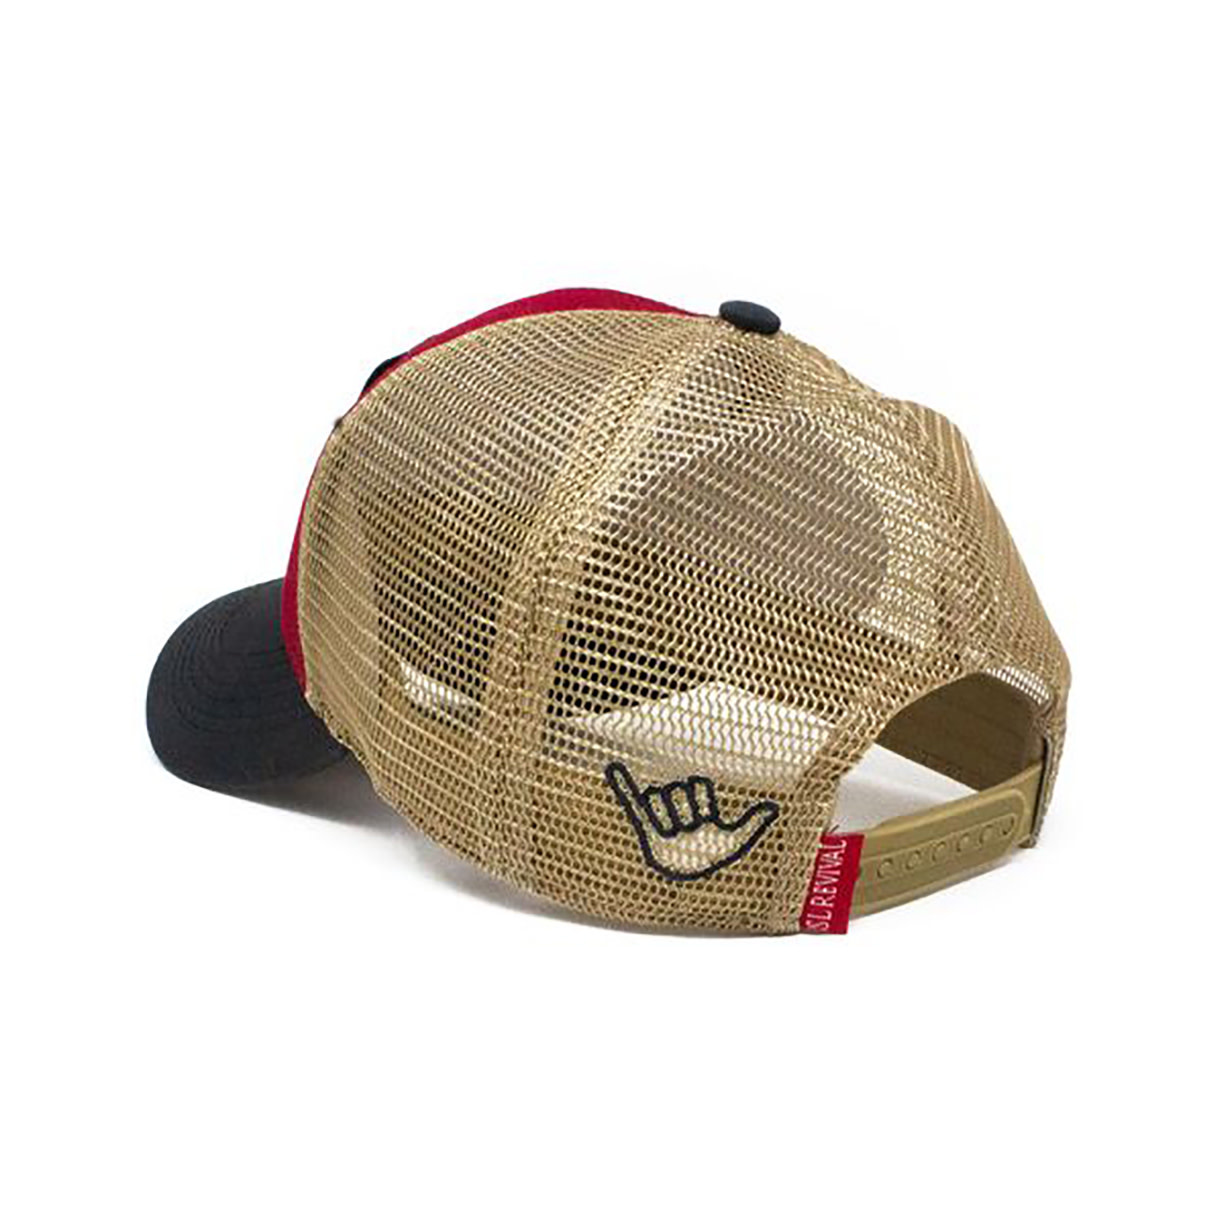 Wave Hog Everyday Structured Trucker Hat, Red/Charcoal-3